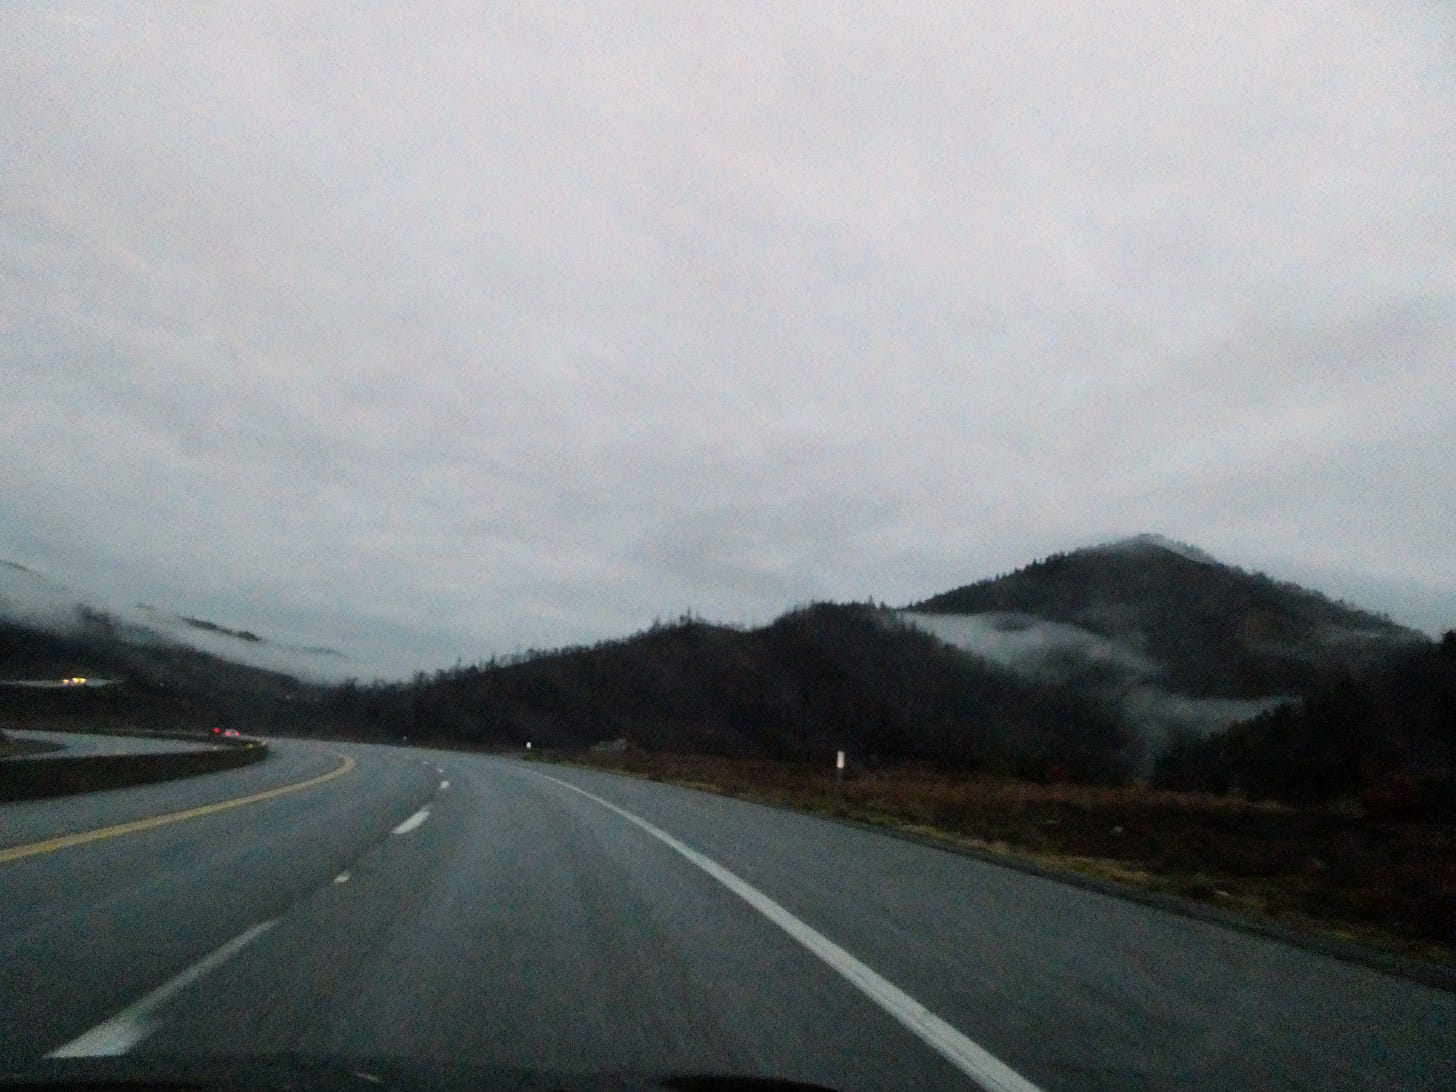 Freeway with hills and mist